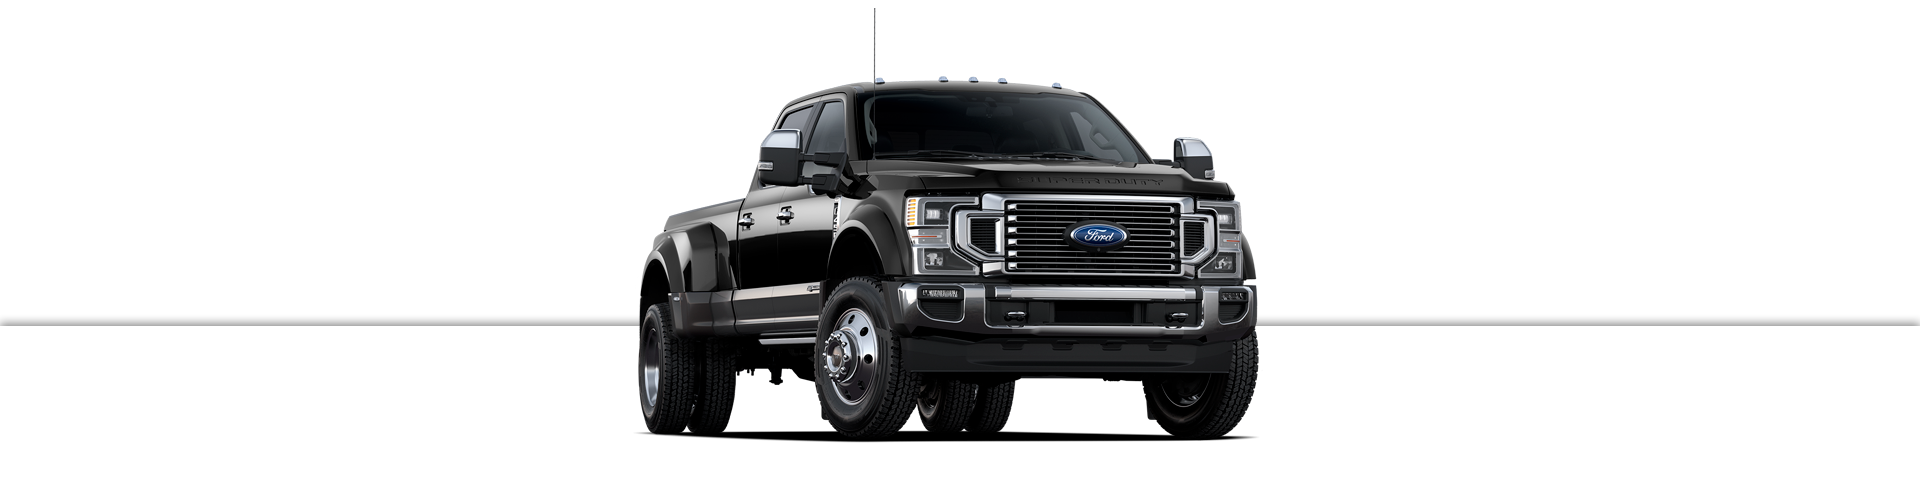 Piedmont Truck Center Inc Is A Ford Dealer Selling New And Used Cars In Greensboro Nc